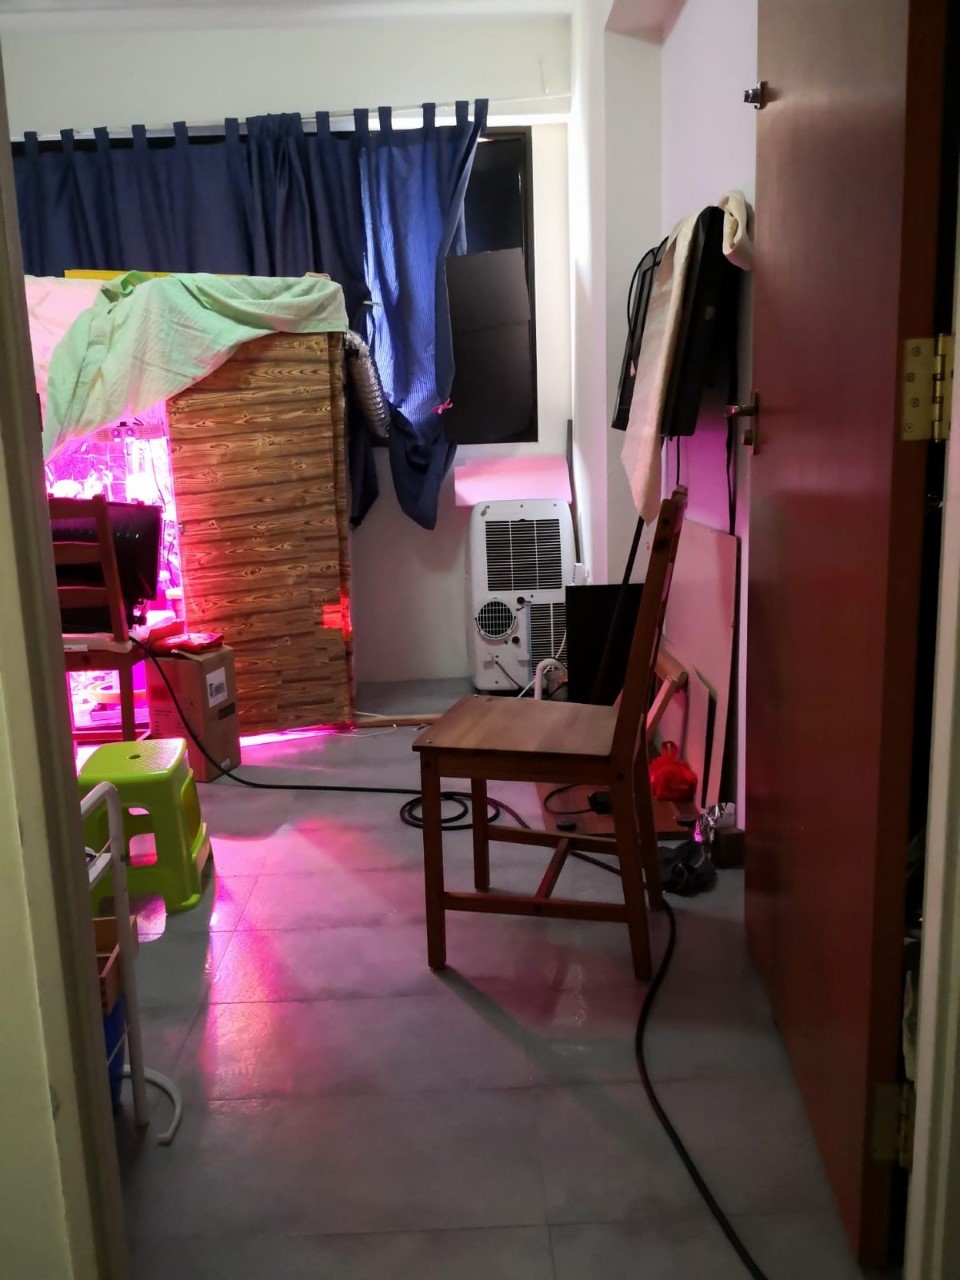 Photo-2 (CNB): View of area within a residential unit, where a makeshift greenhouse was erected for cultivation of cannabis plants, raided by CNB on 9 September 2019.